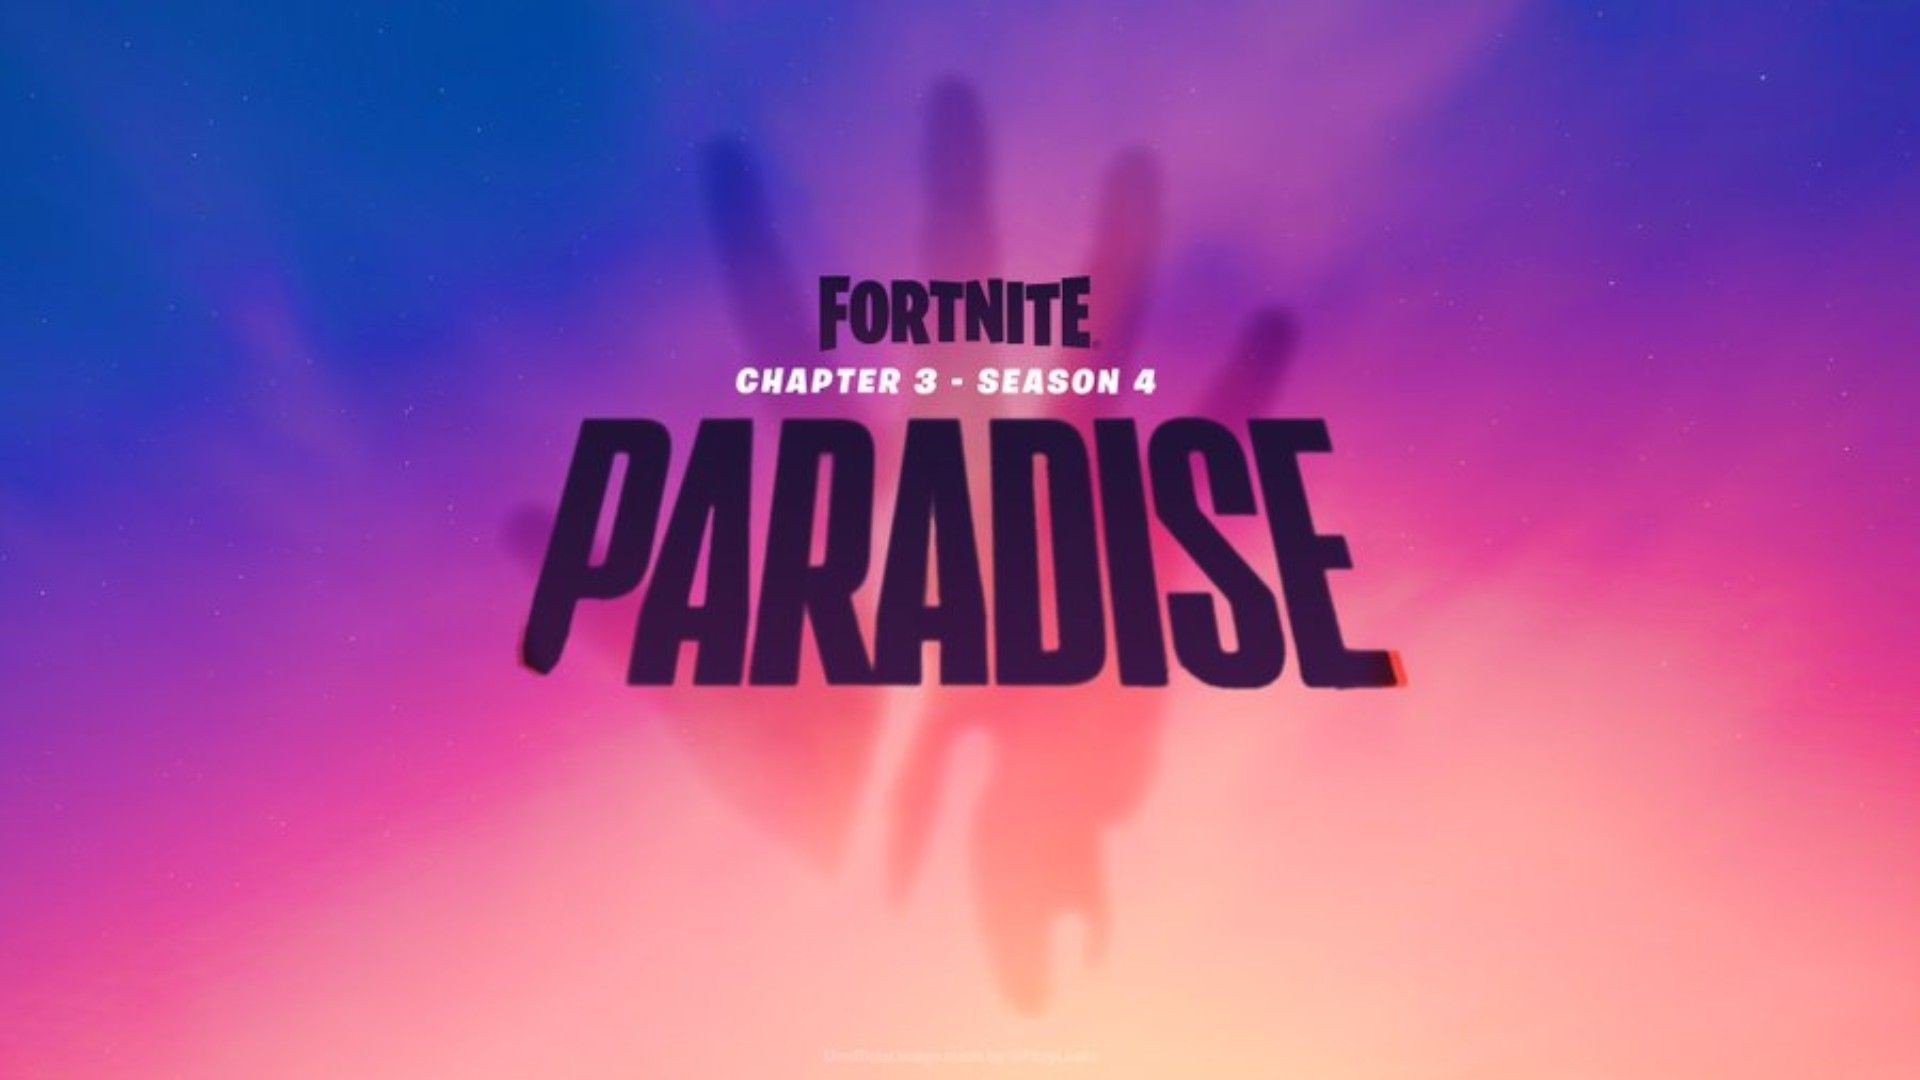 New details leak about Fortnite Chapter 3 Season 4 live event